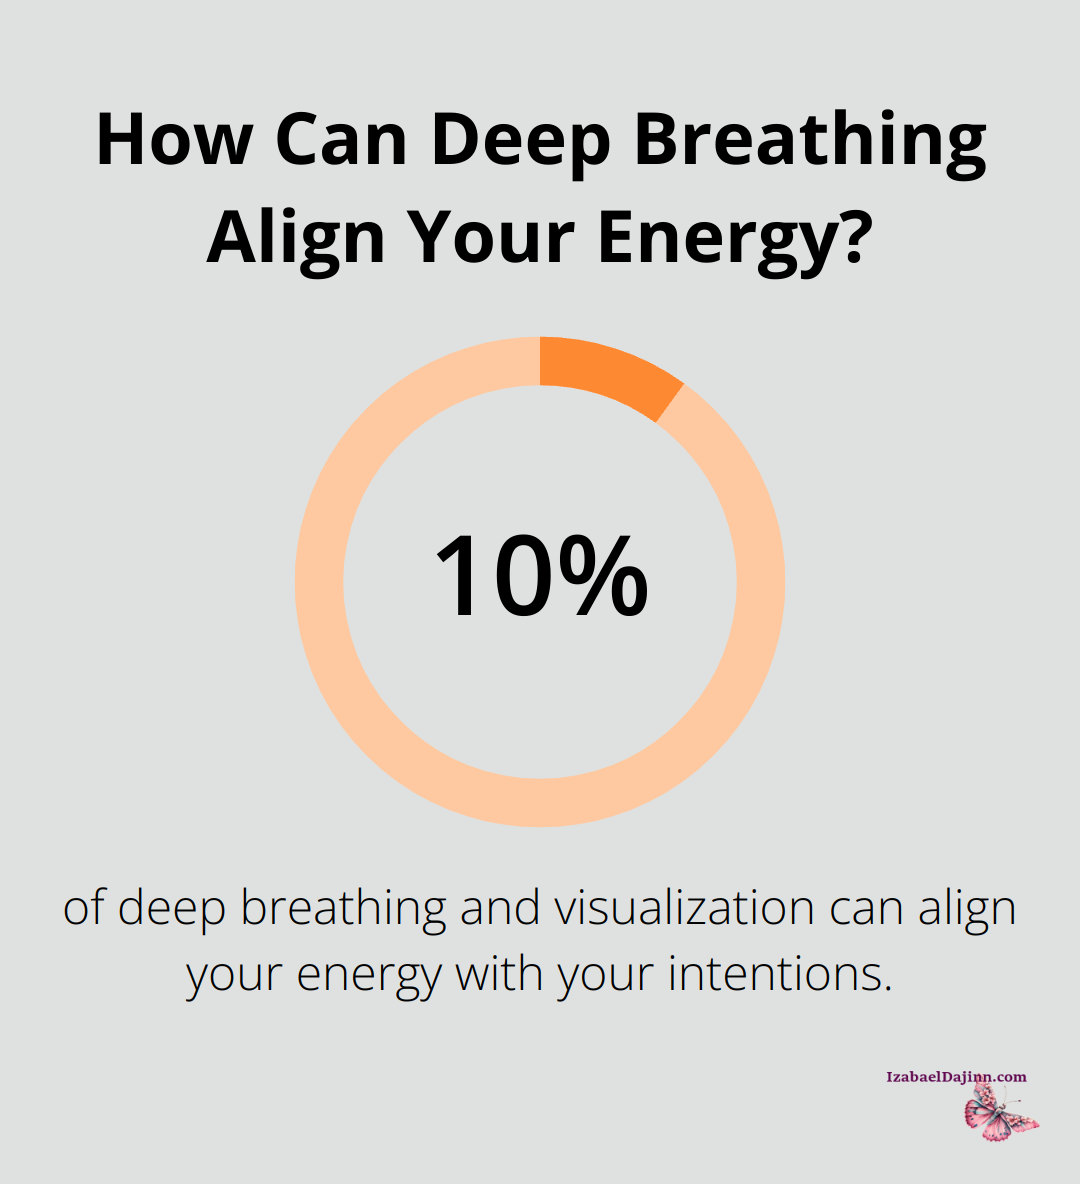 How Can Deep Breathing Align Your Energy?